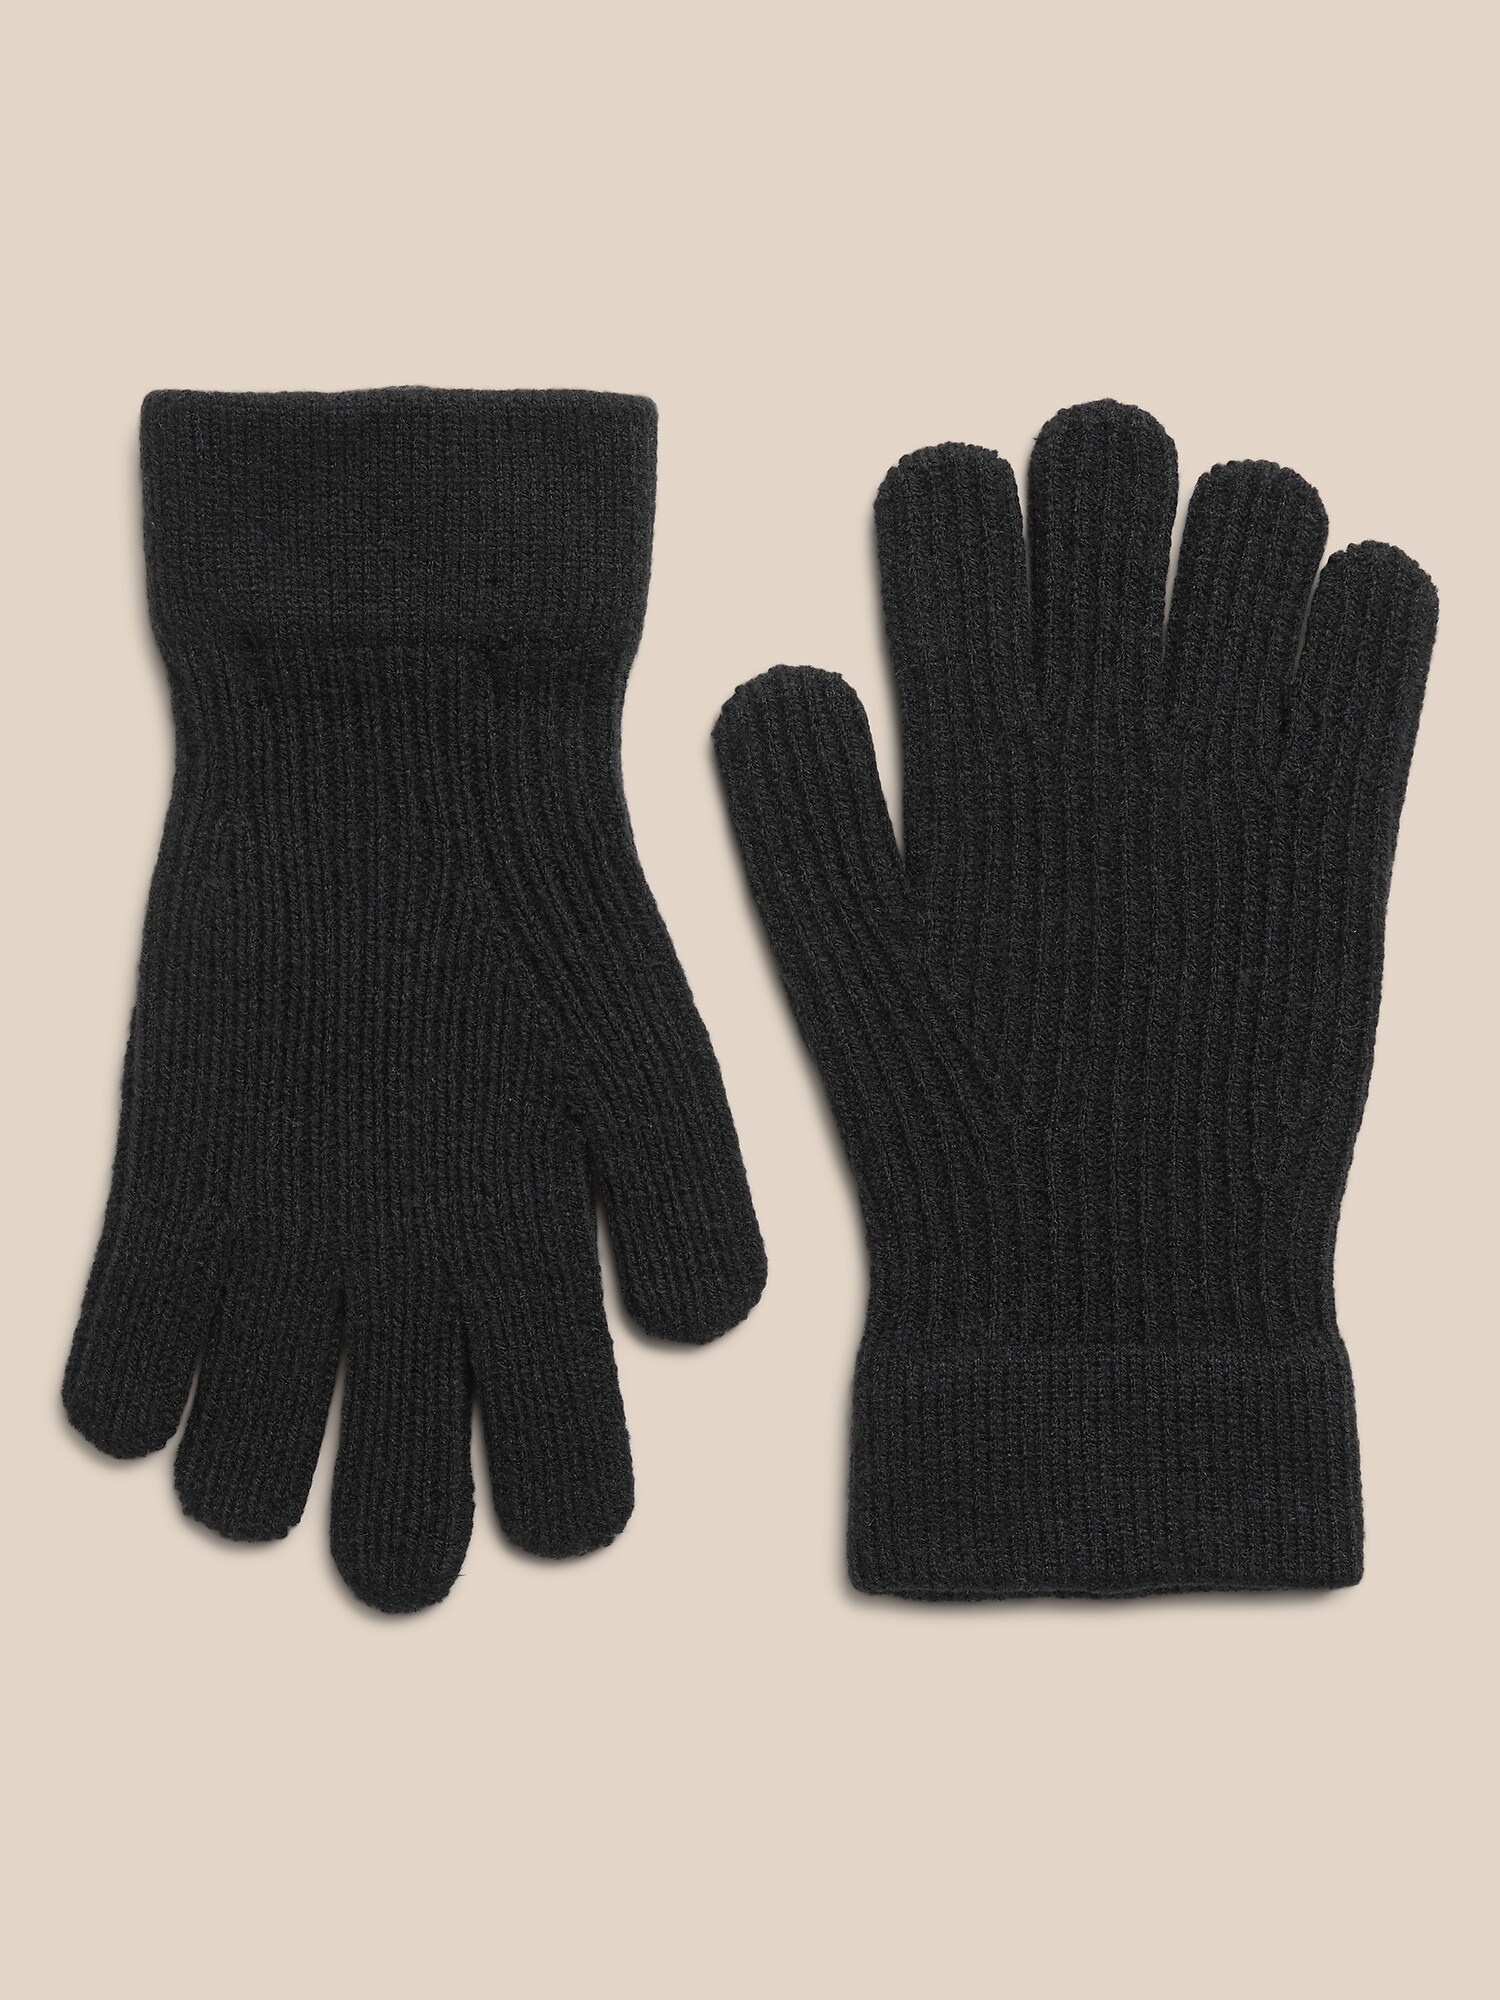 Ribbed Knit Glove